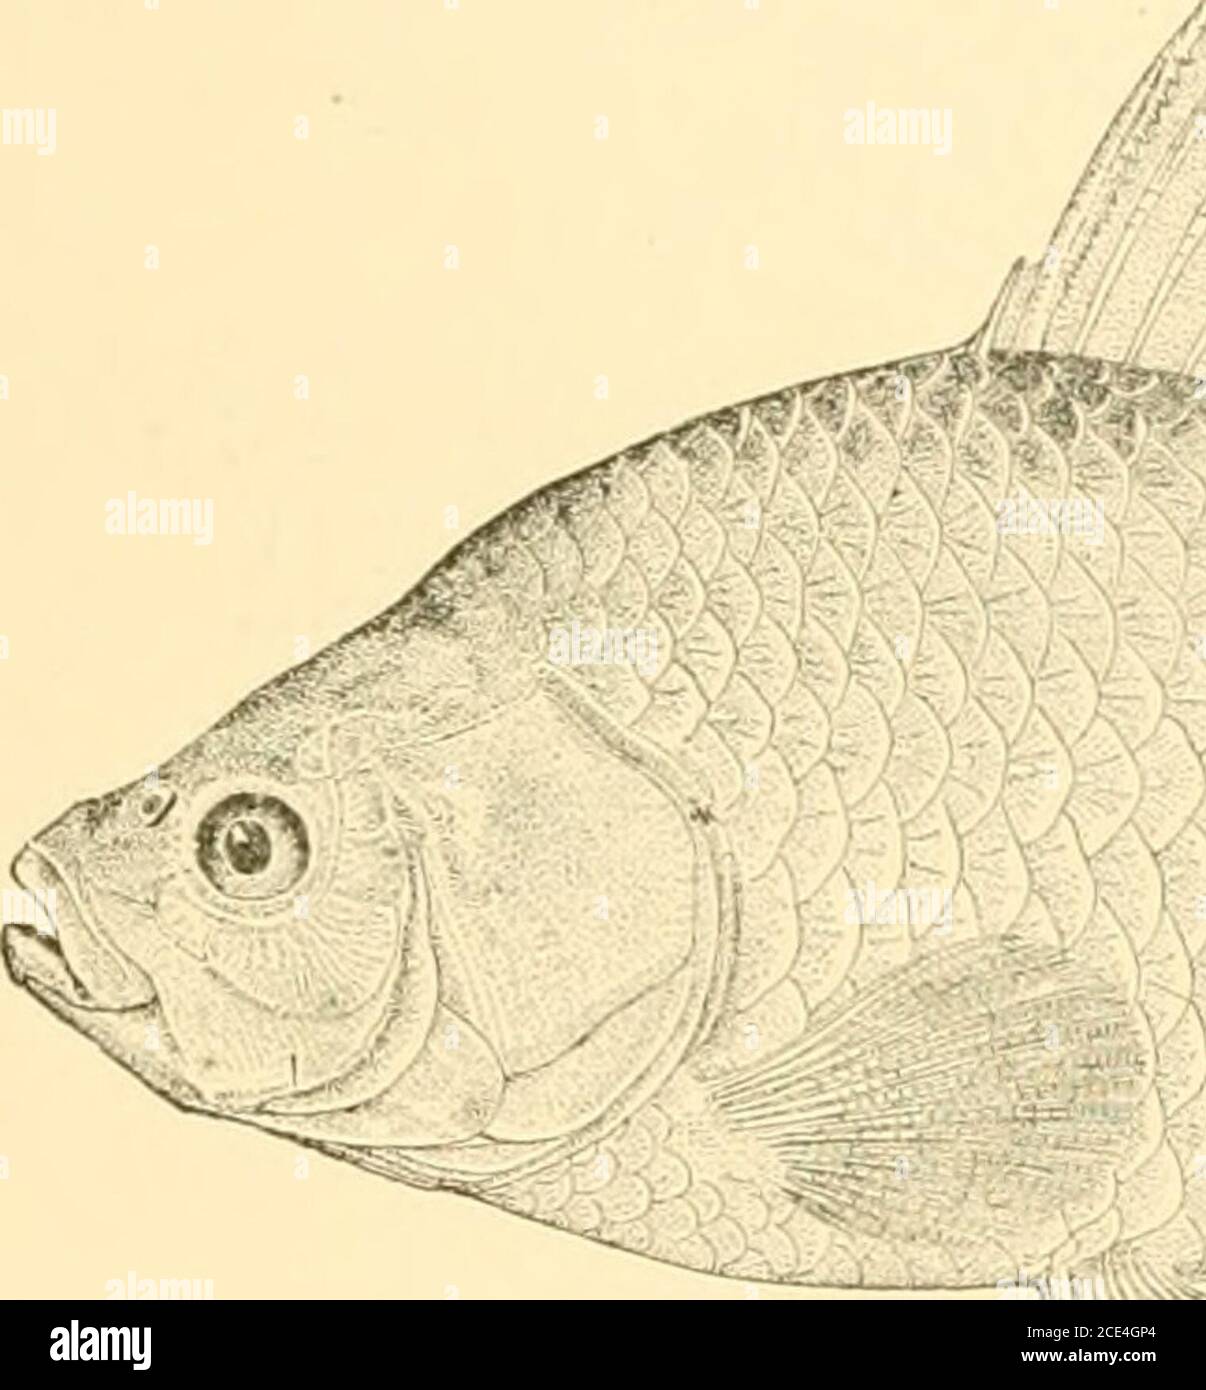 . American fishes; a popular treatise upon the game and food fishes of North America, with especial reference to habits and methods of capture . aris, the Karausche of Germany, oftencalled the Crucian Carp or German Carp, is as protean in its forms asCyprinus carpio itself, and probably found its way from the far East inmuch the same manner : a large-headed form, C. gihclio, is often calledthe Prussian Carp, and a specially differentiated type, C. buccphalits, livesonly in the warm springs of Macedonia. The Gold Cari^ or Gold-fish isbelieved by some competent ichthyologists to be simply a vari Stock Photo